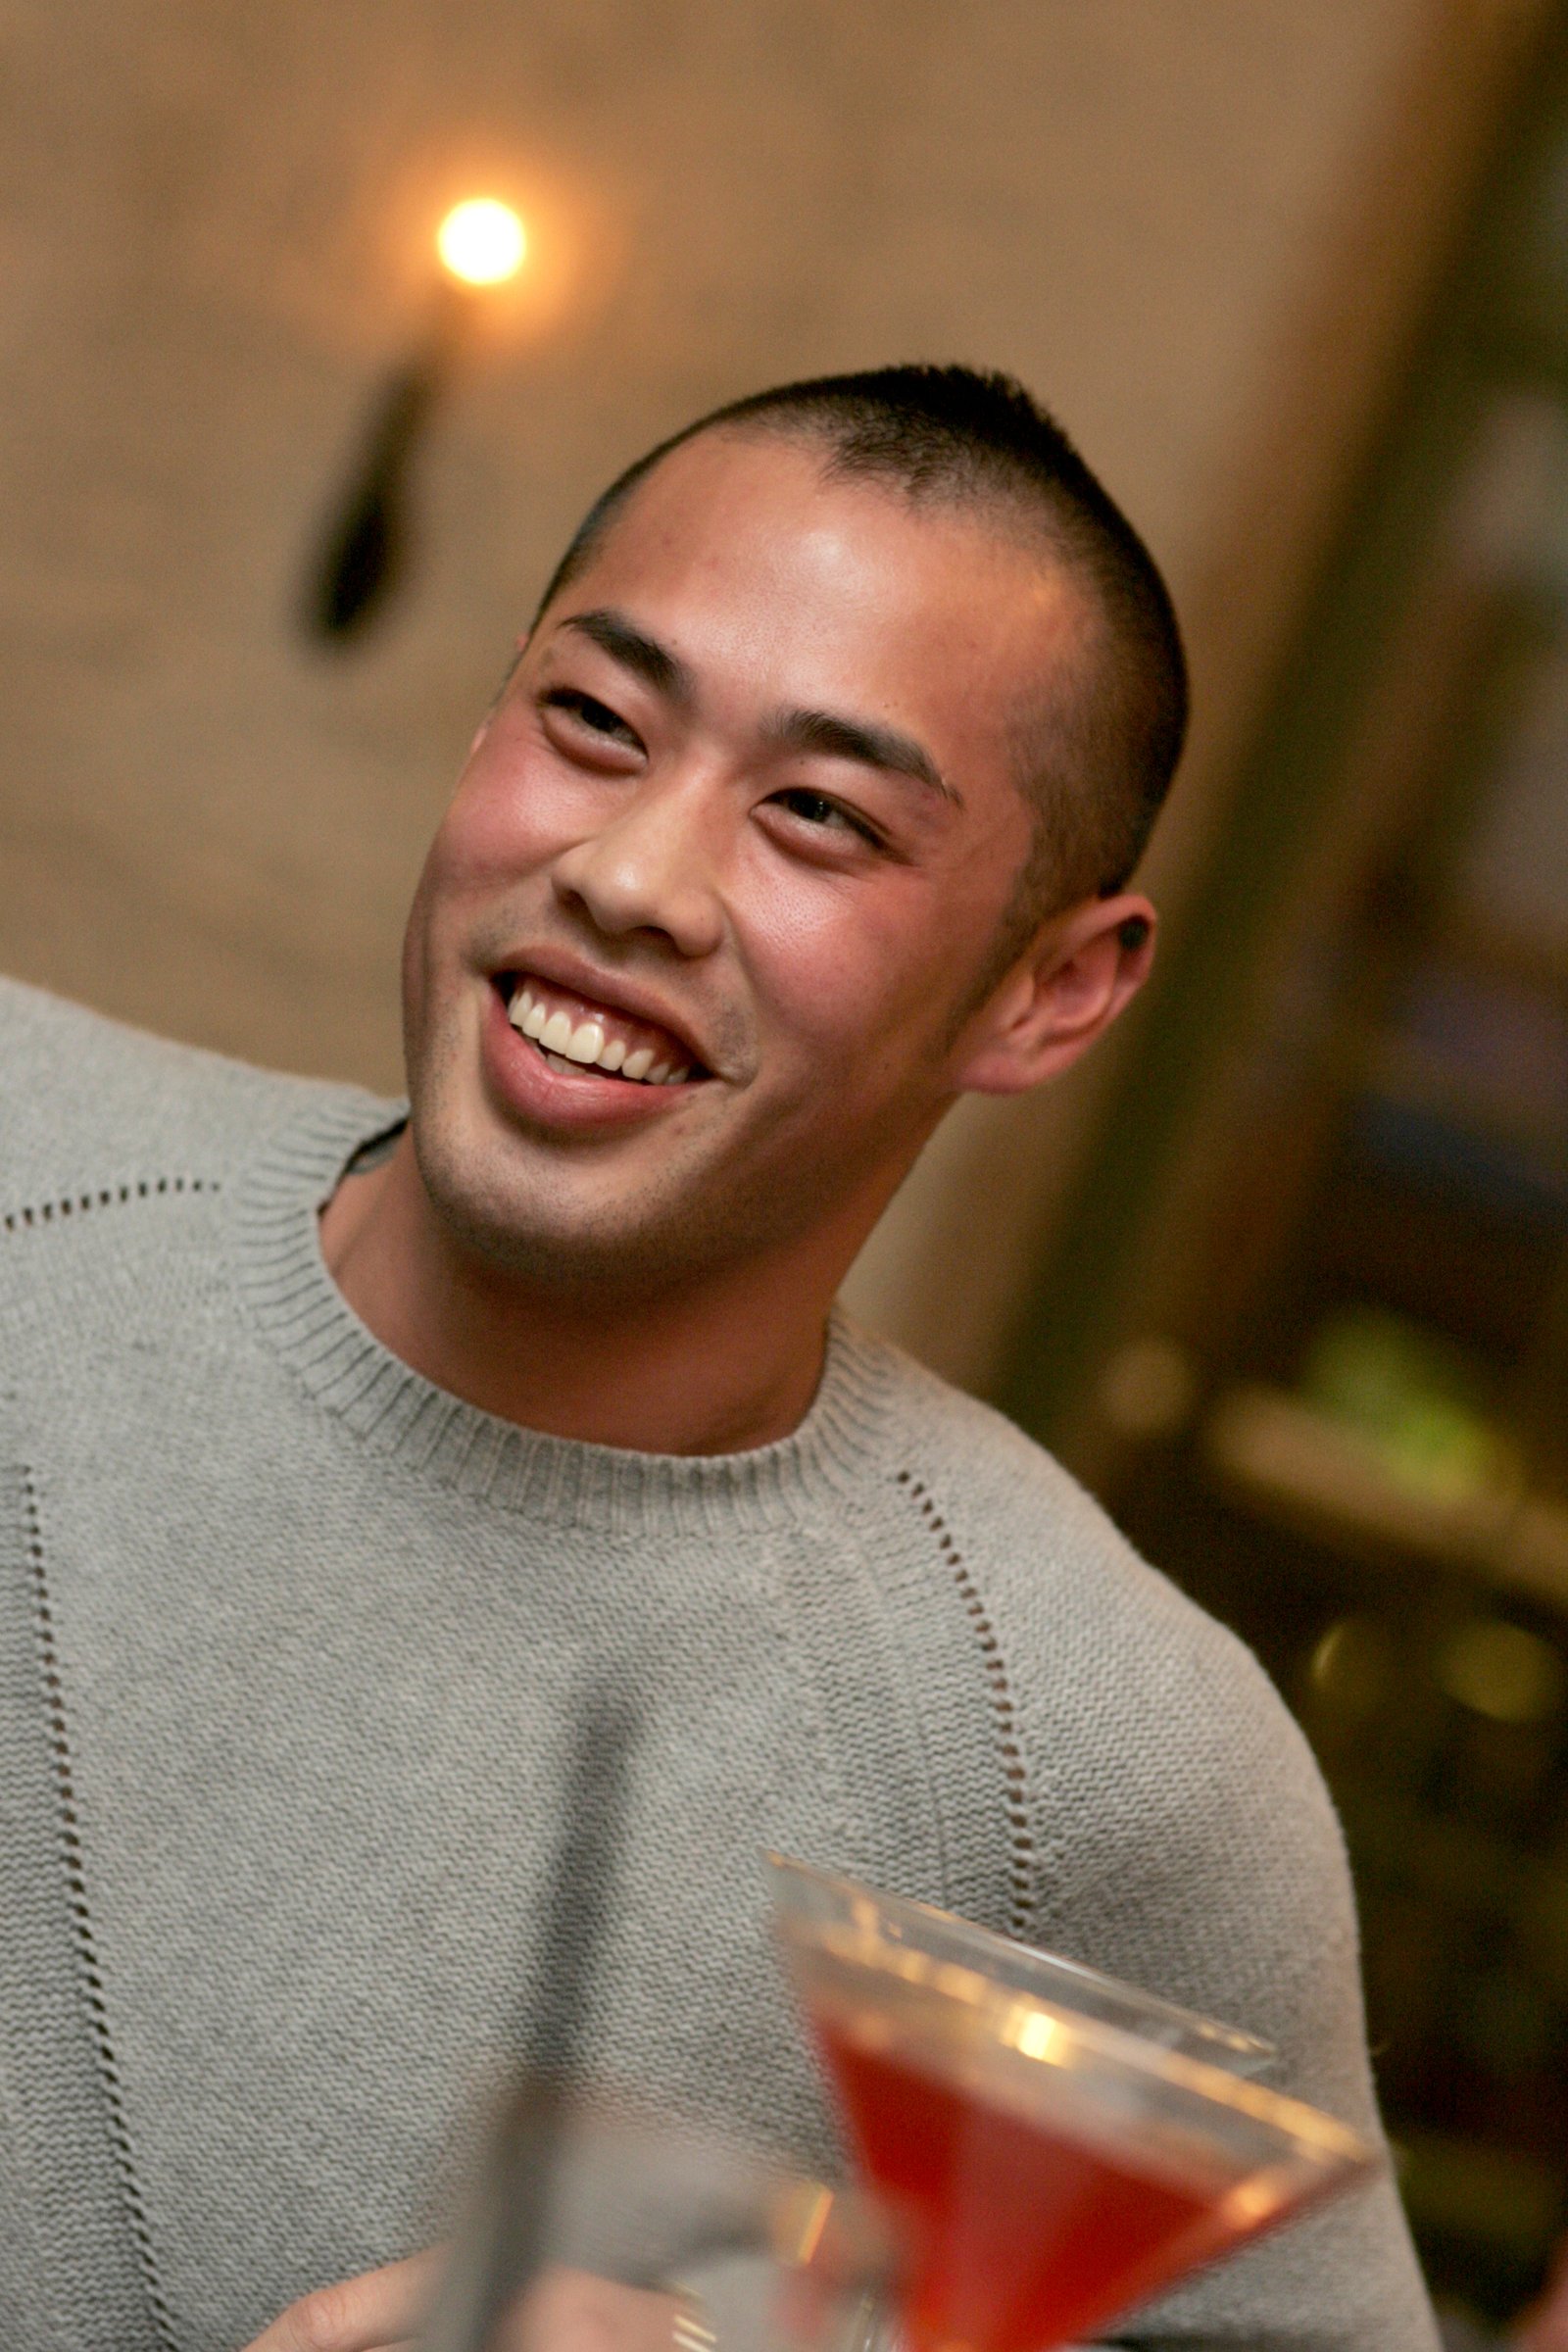 Jason Leong, of Hayward, has drinks with friends at the Village Cafe in San Jose, California, on June 8, 2005. Young, blue collar adults, ages 18 to 25, with tastes for Louis Vuitton bags, tricked-out roadsters and Grey Goose vodka have been described by marketers as the gold-collar generation. (Eugene H. Louie/NC WEB BL/MCT)